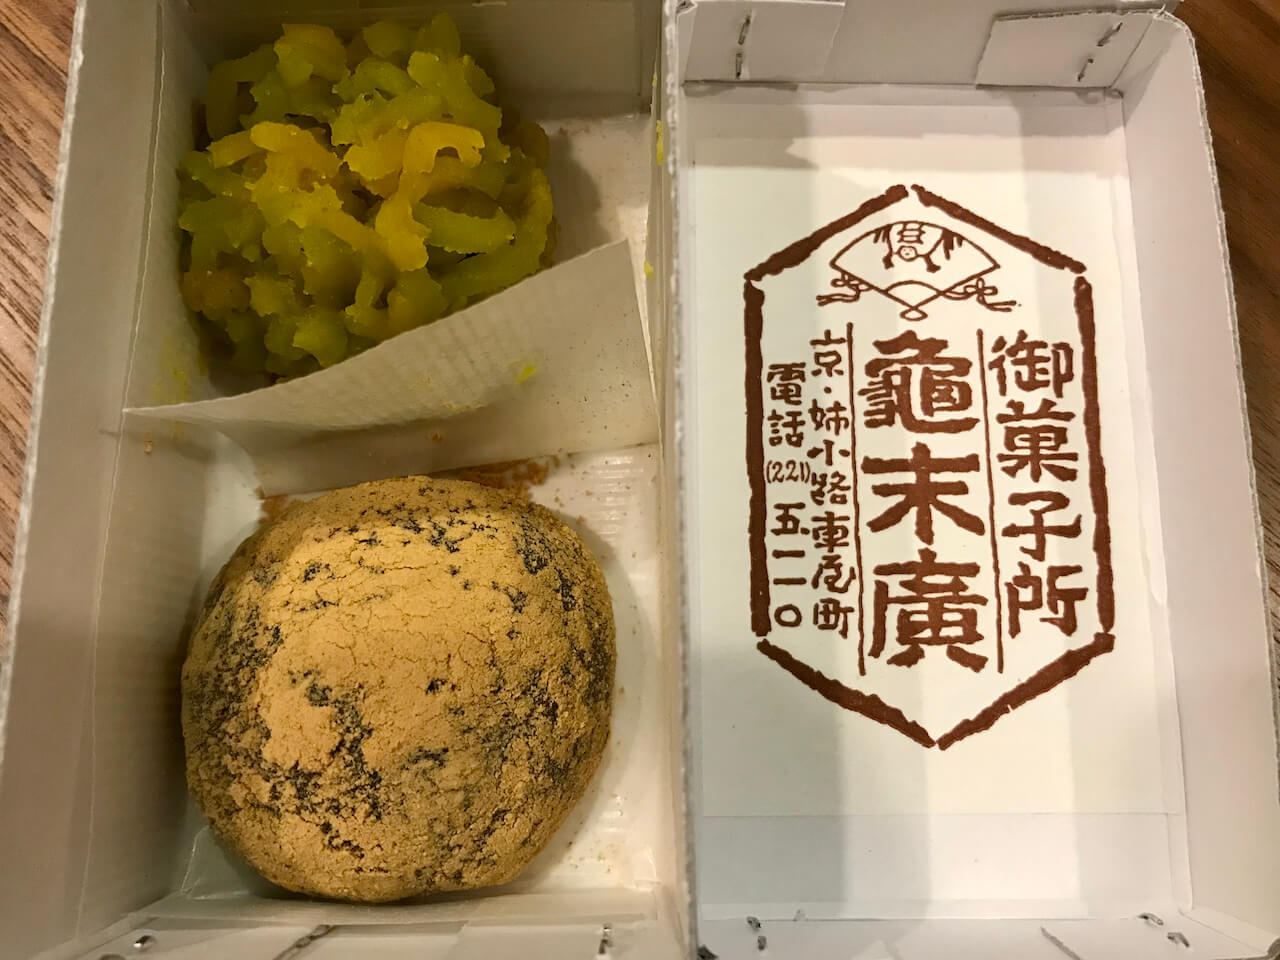 Japanese sweets in Kyoto